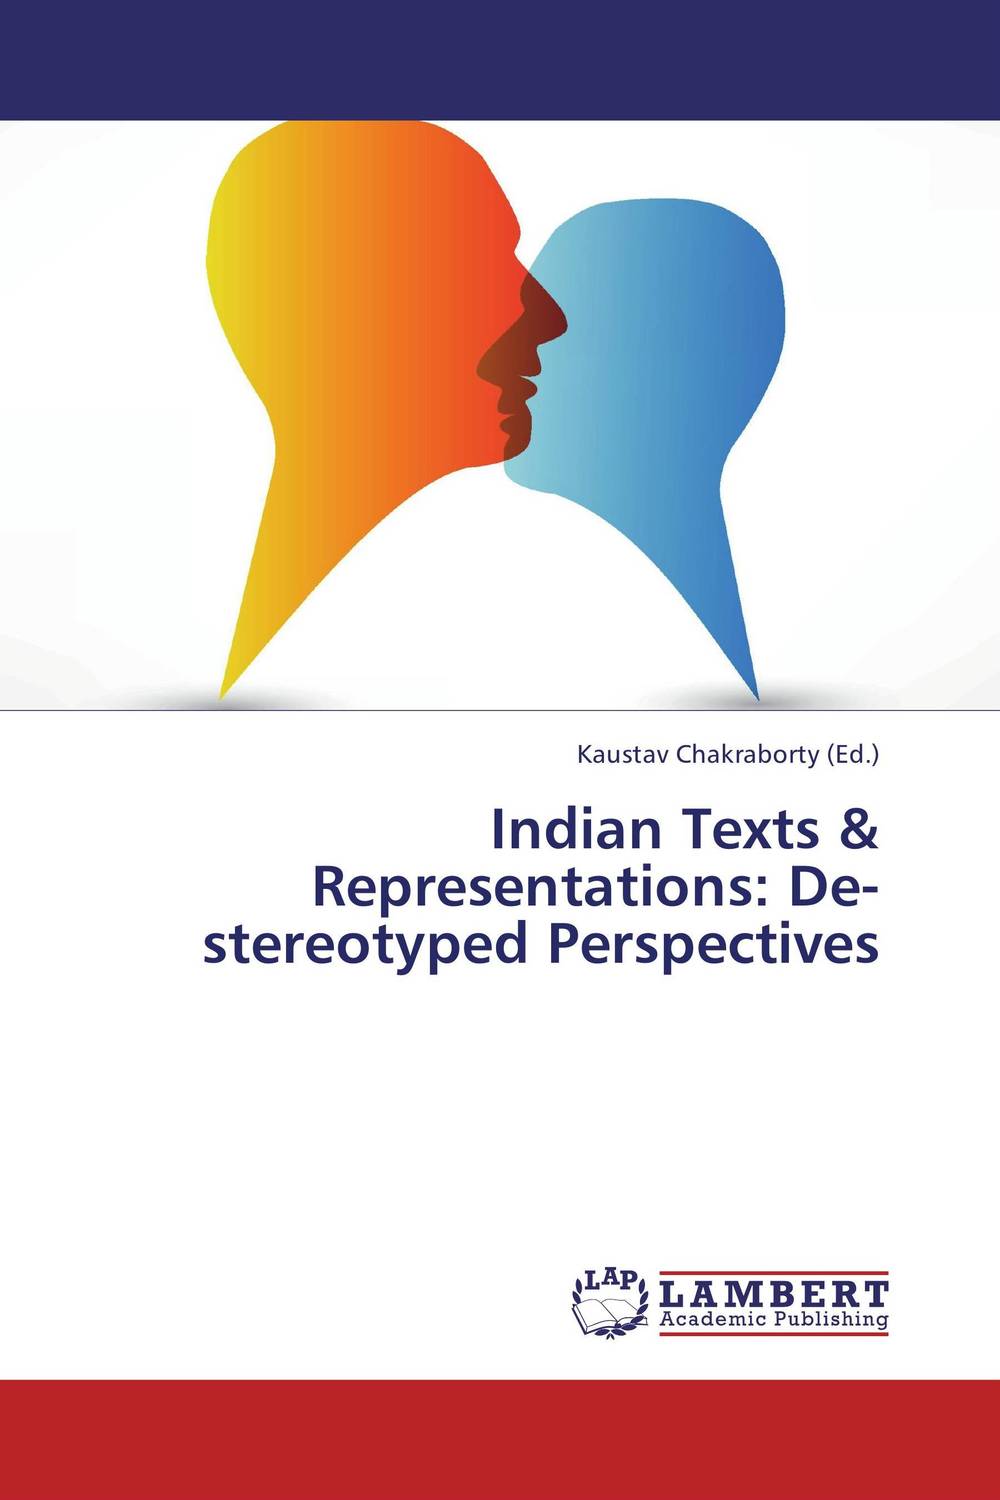 Indian Texts & Representations: De-stereotyped Perspectives